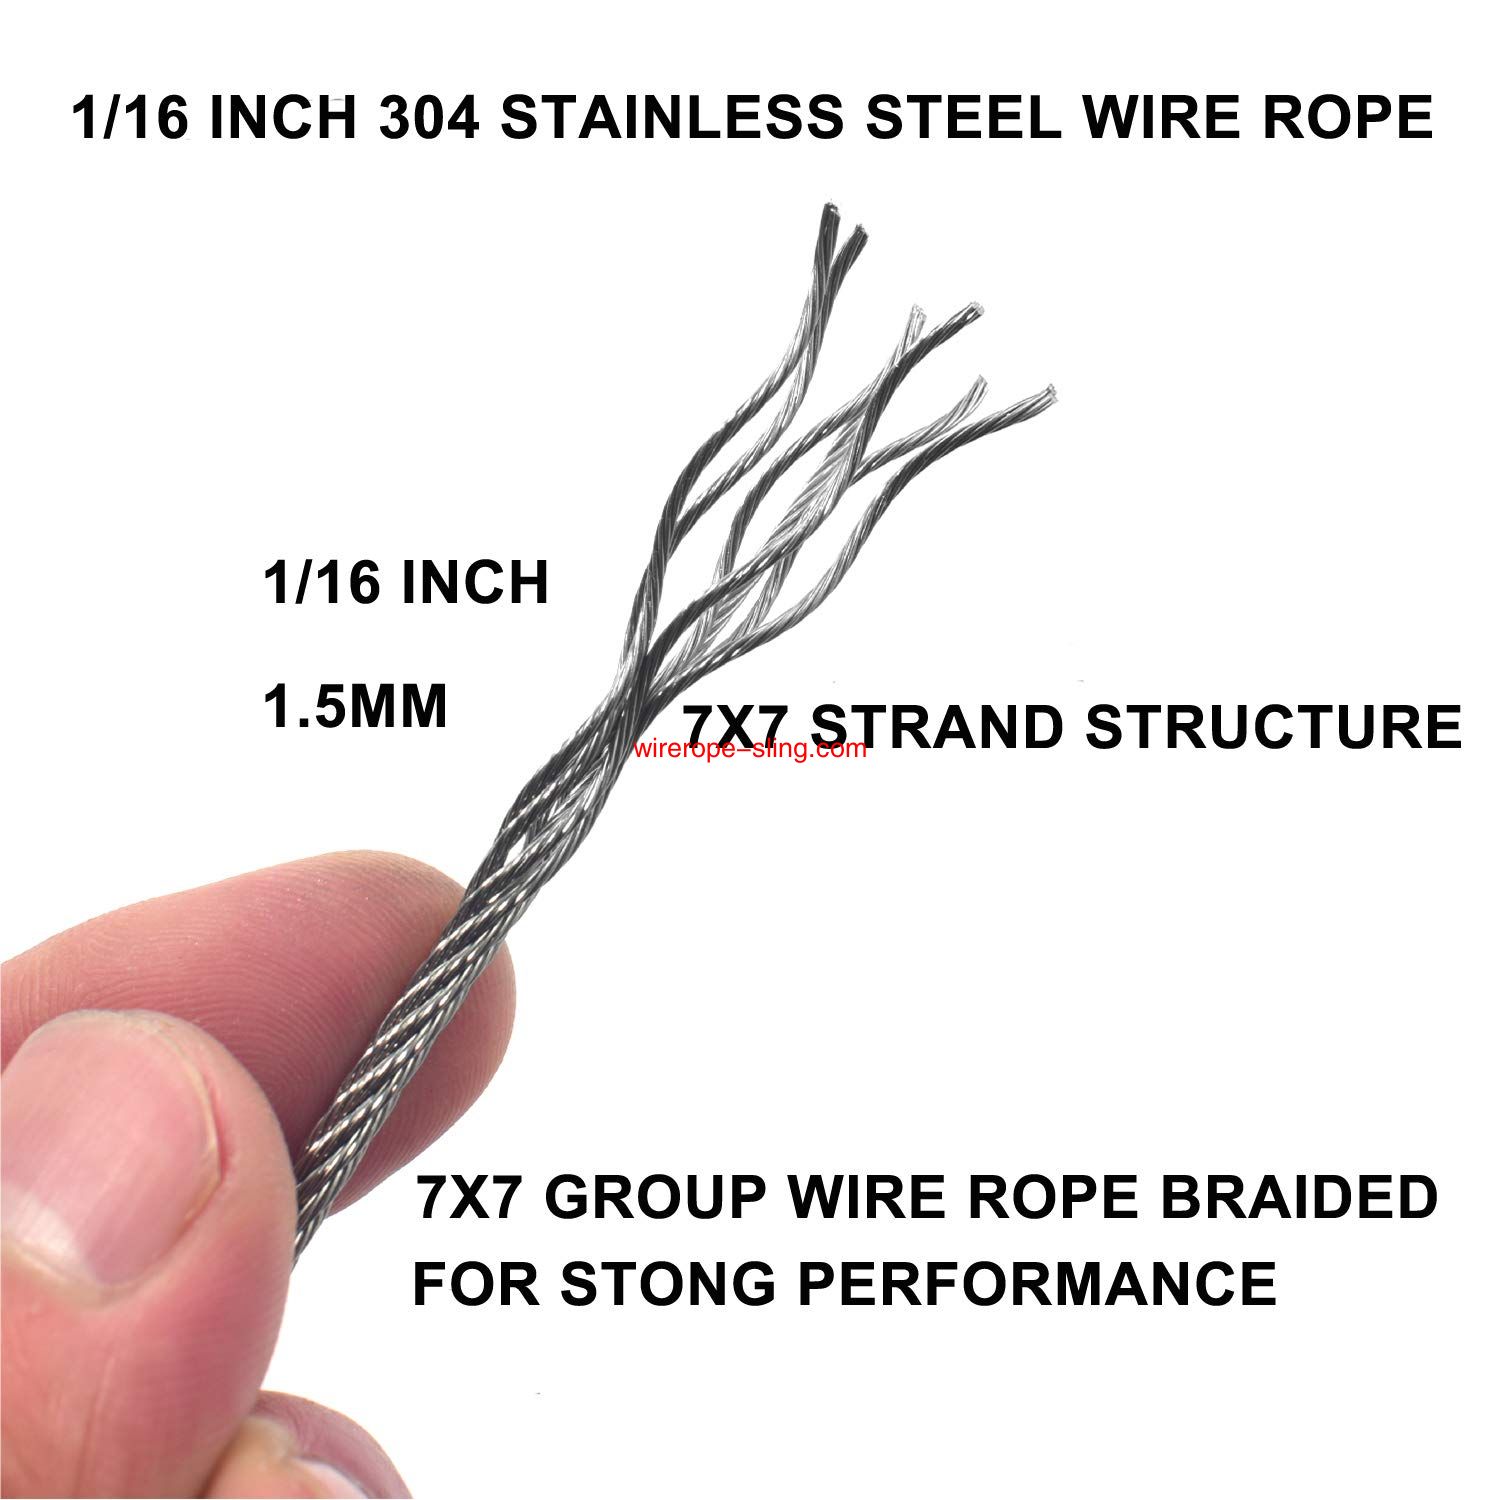 1/16 Ink Vinyl Coated Wire Rope Kit,330 Feet Stainless Steel 304 Wire Rope mit 50 PCS Aluminium Crimp Loop und 10 PCS Clamps